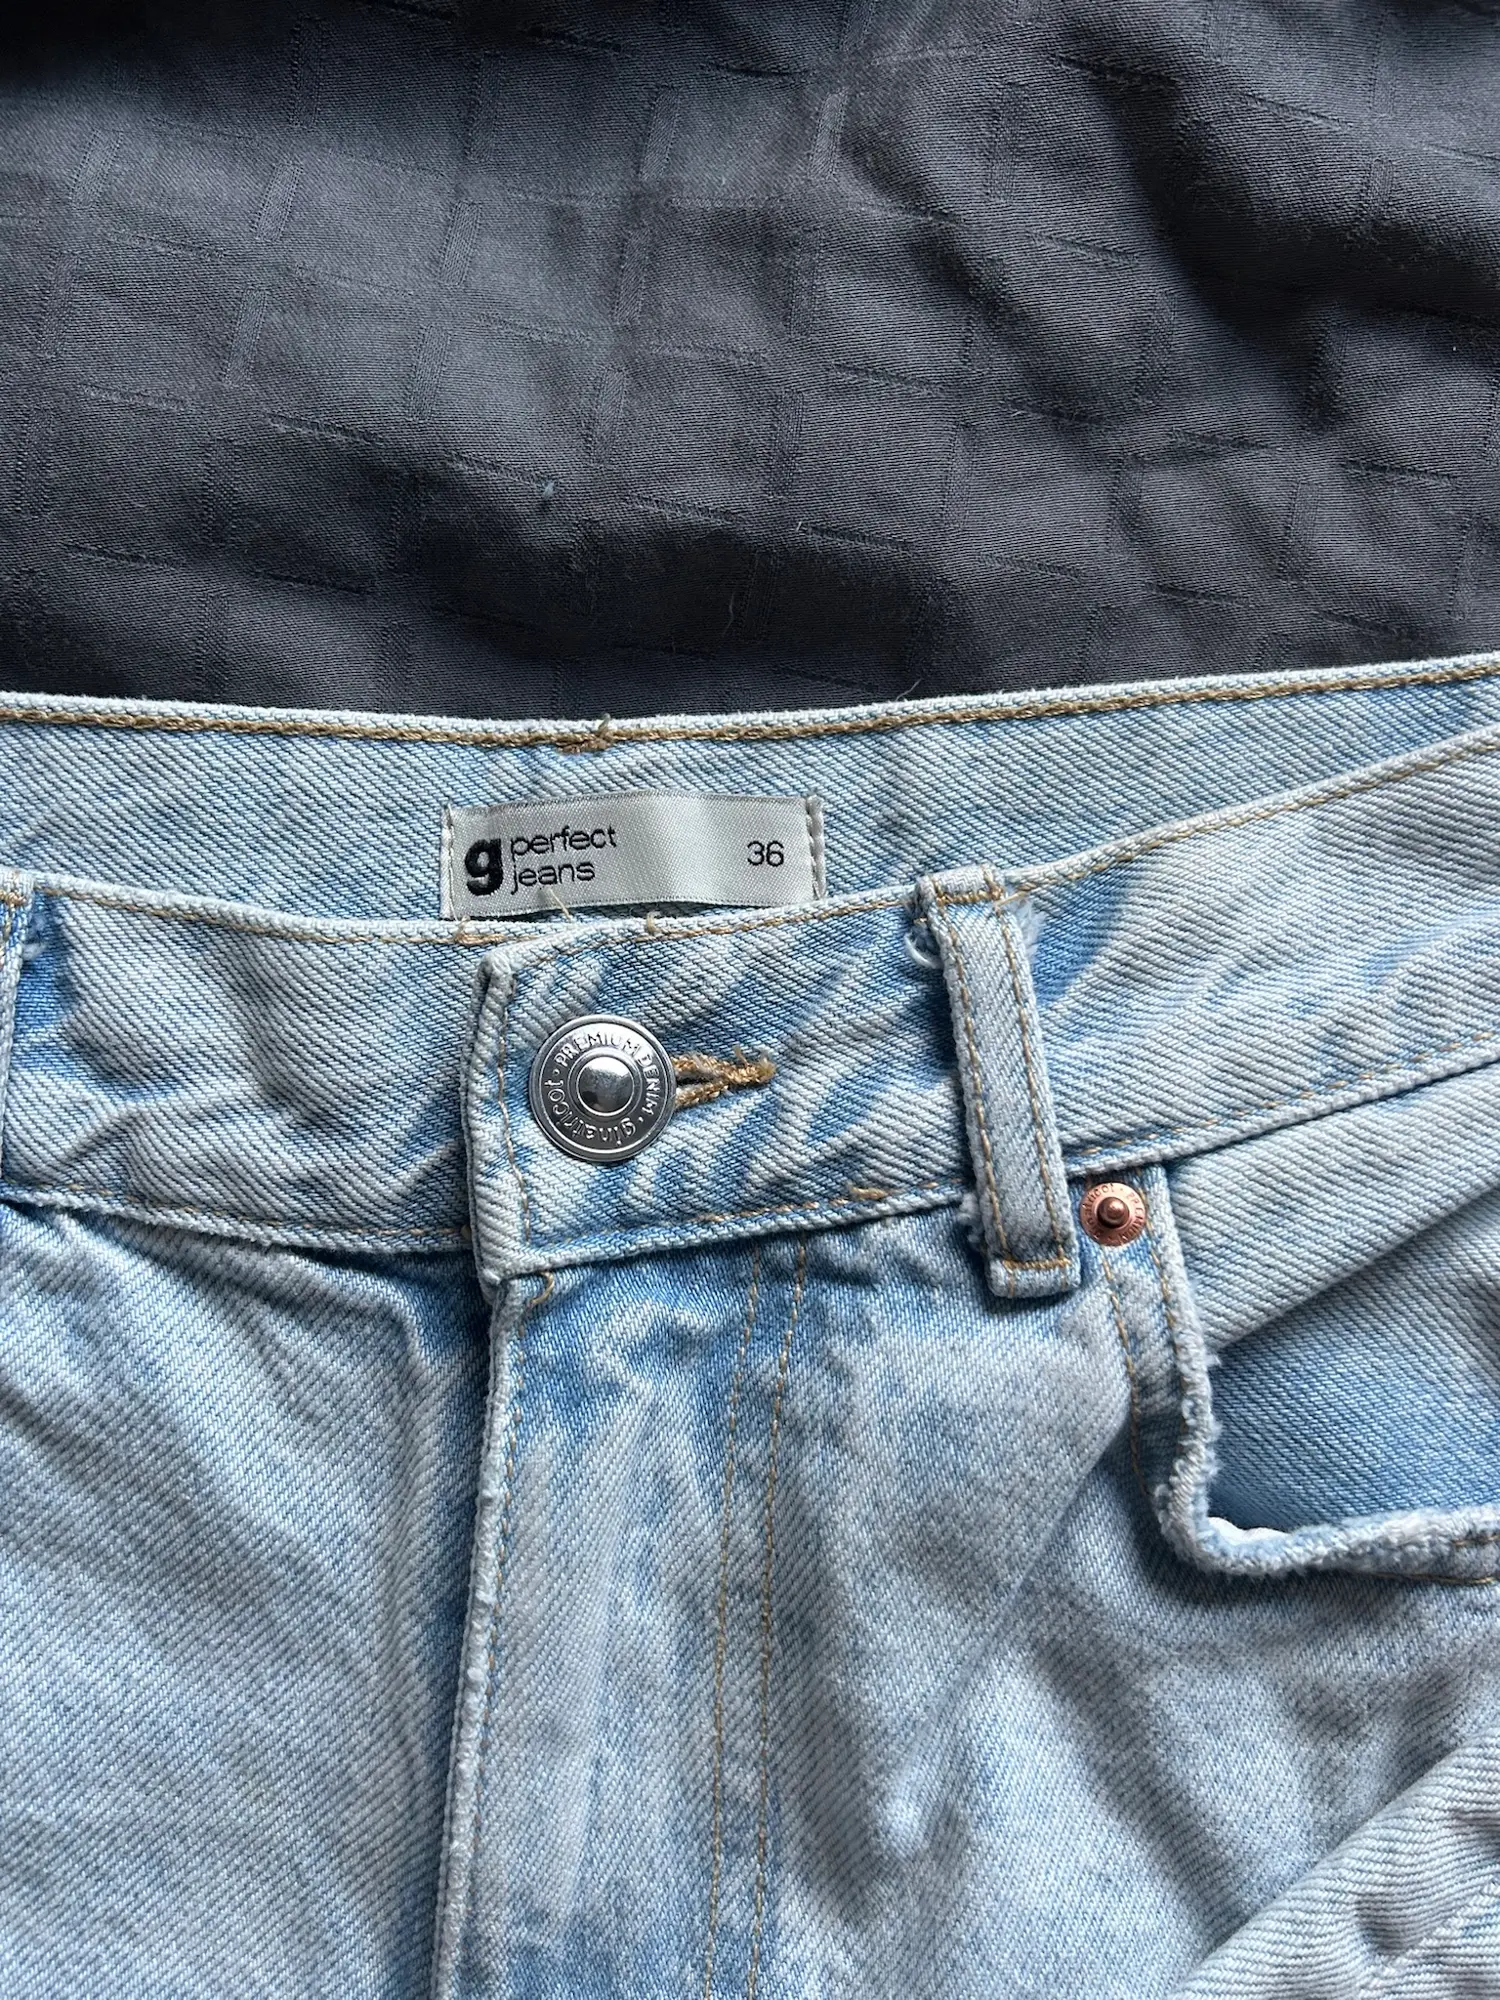 Gina Tricot jeans